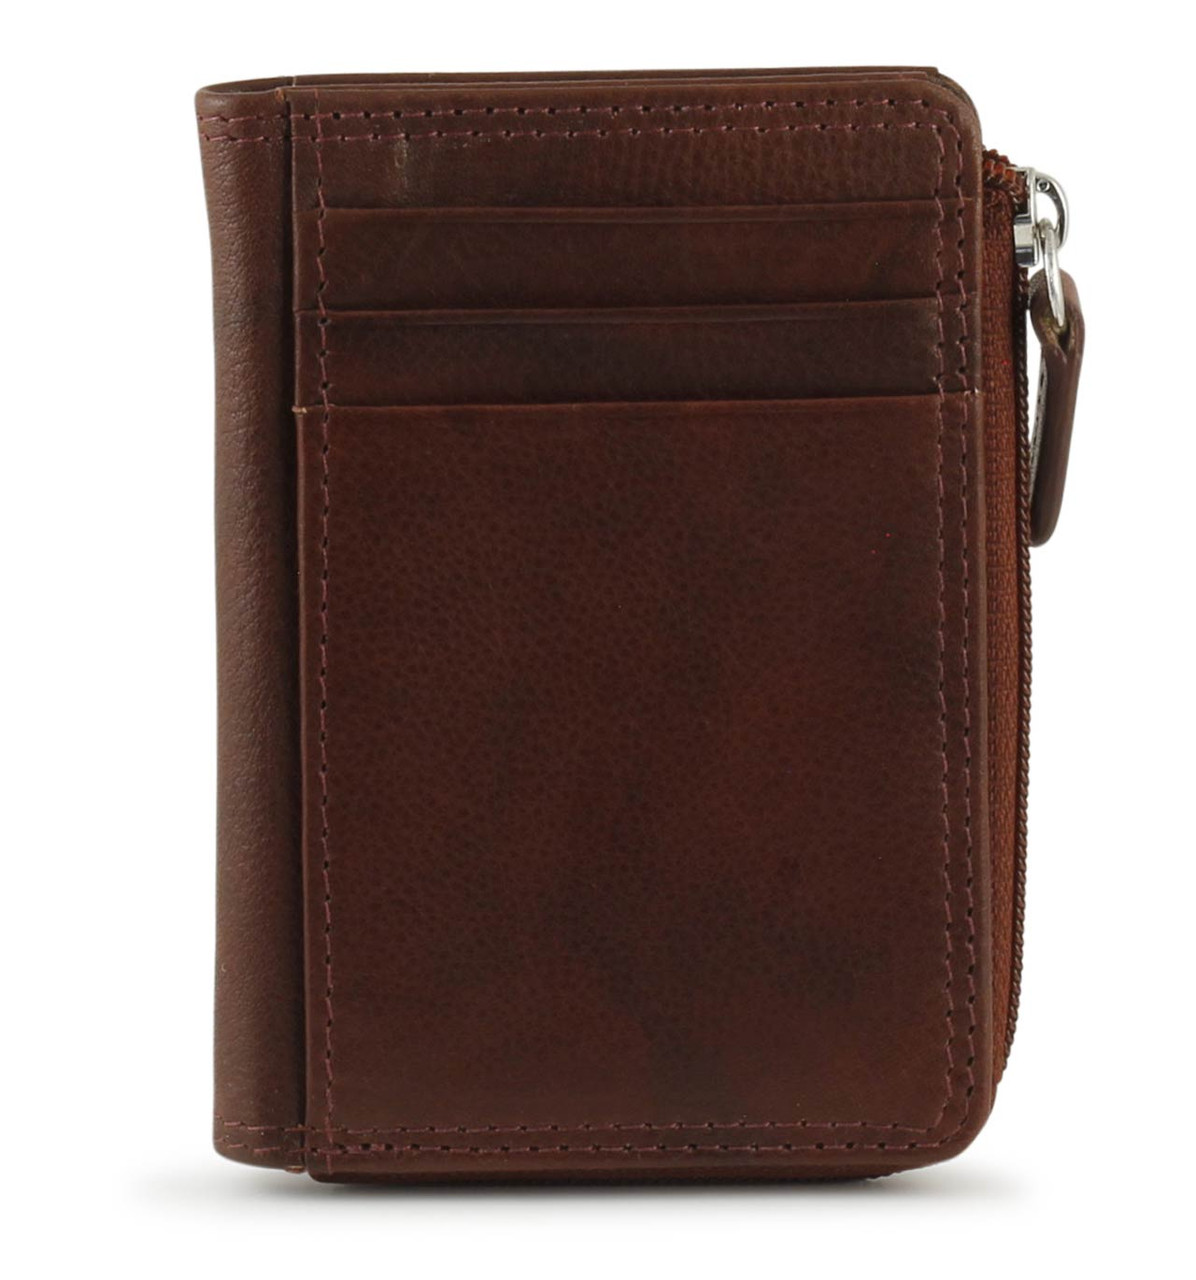 RFID Credit Card and ID Holder with Gusset Pockets